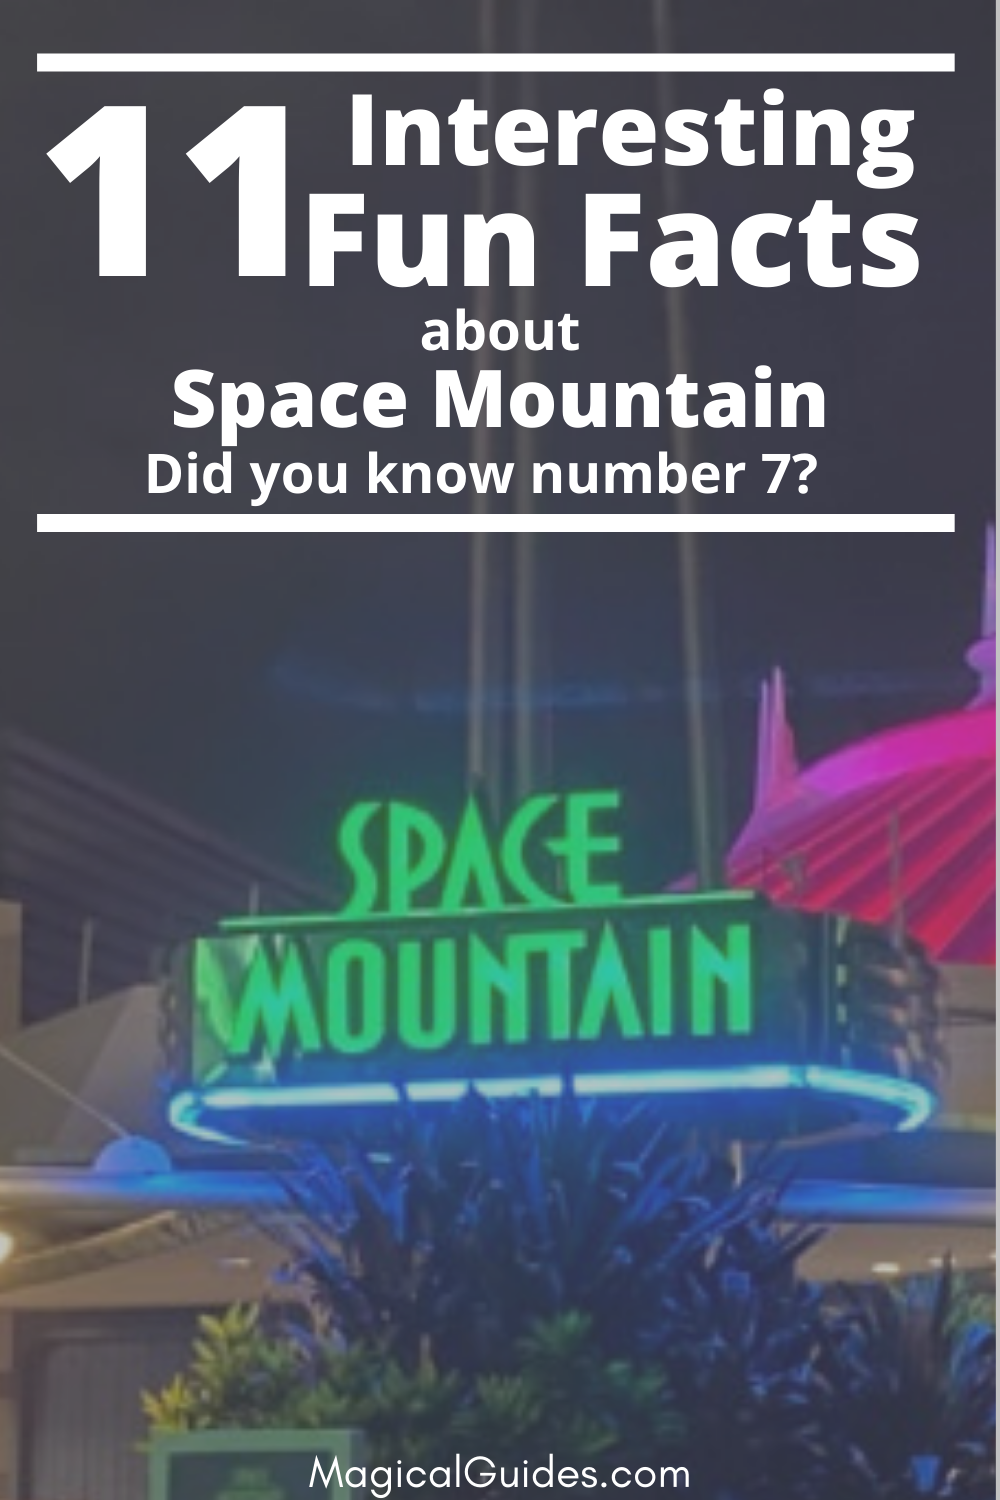 Learn about the History of Space Mountain, Secrets, and Easter Eggs of this iconic Walt Disney World attraction. This popular attraction has many Disney World fans waiting in line for this thrill ride. Next time you're waiting in line, you can annoy your family with all 11 of these fun facts!